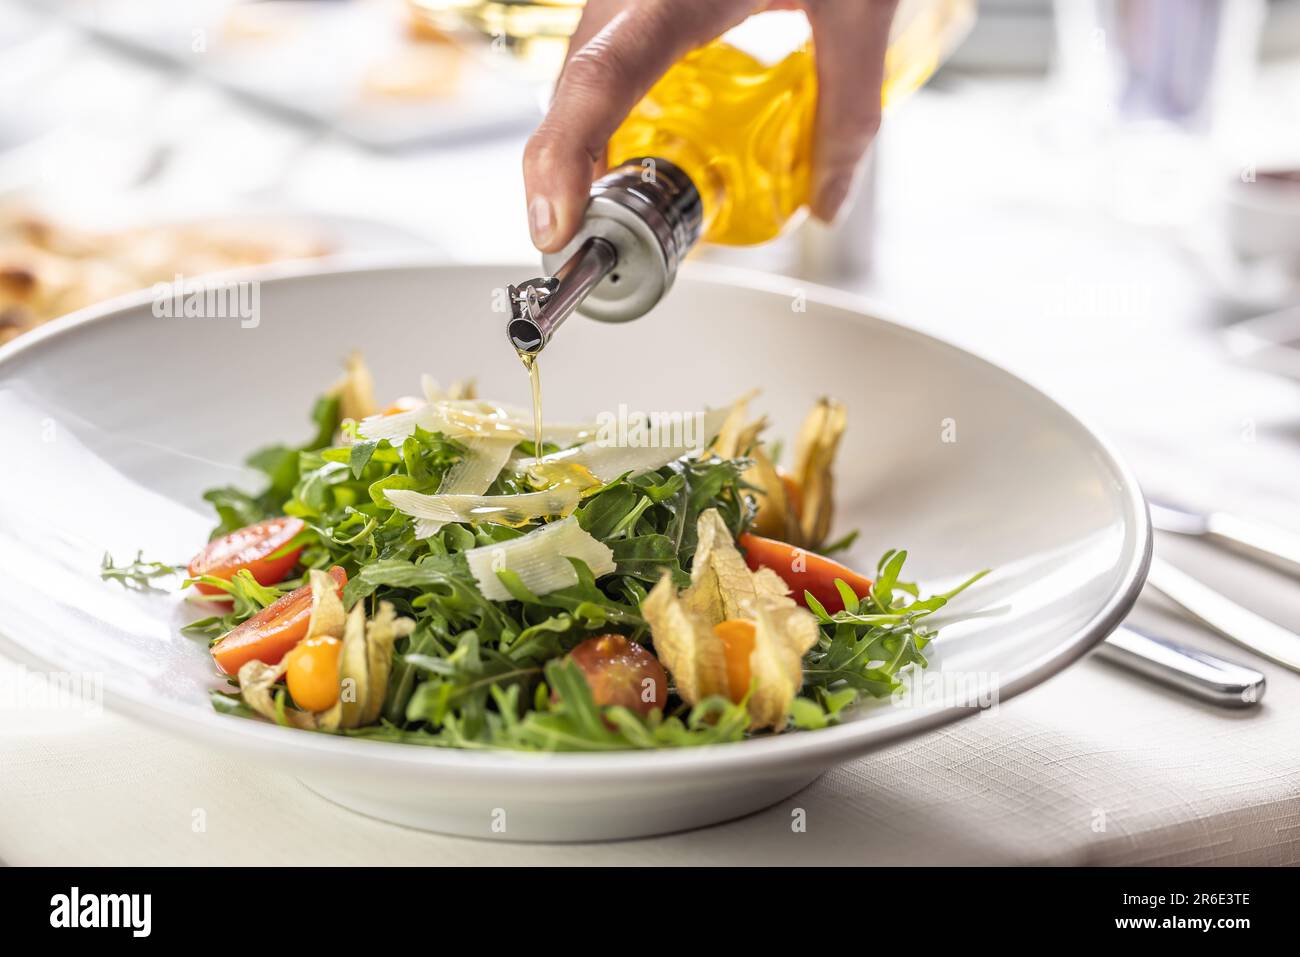 Olive oil pouring over a fresh rocket salad with parmesan shavings and physalis. Stock Photo